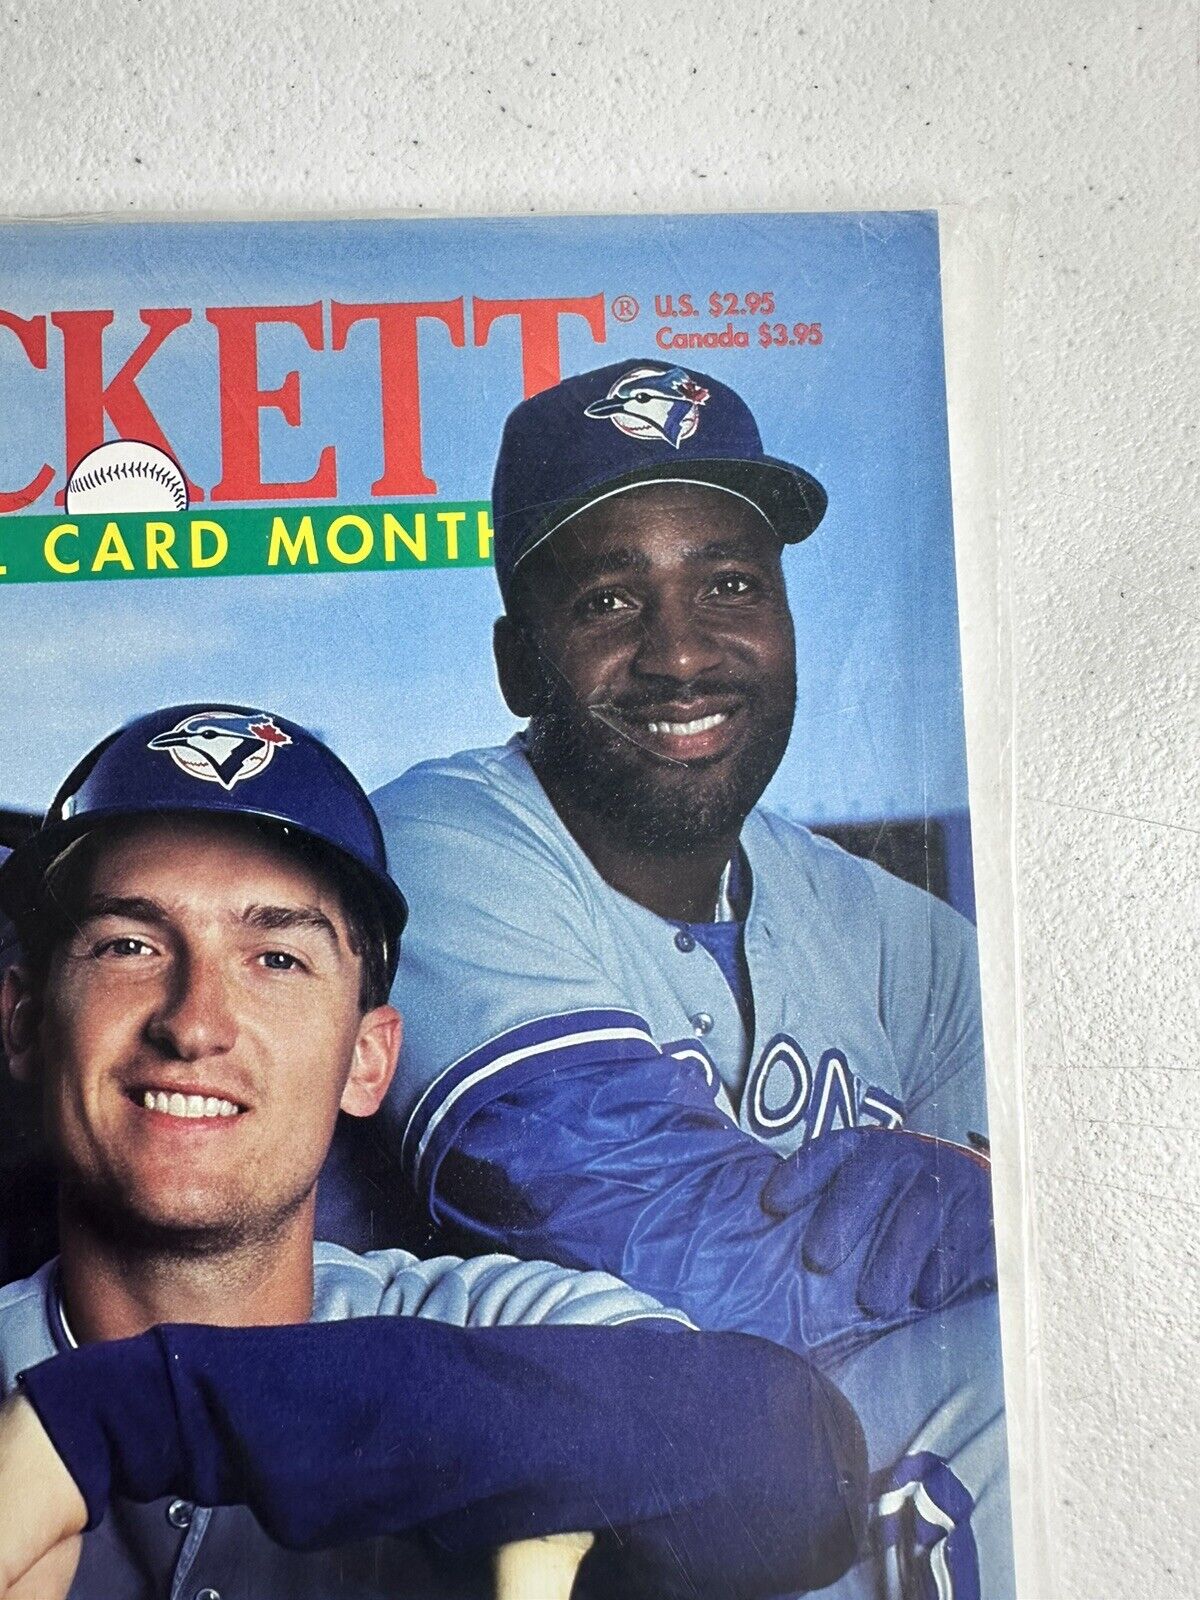 Sealed Beckett Baseball Card Monthly - August 1993 Issue #101 Featuring Blue Jays - Rare Collectible - TreasuTiques